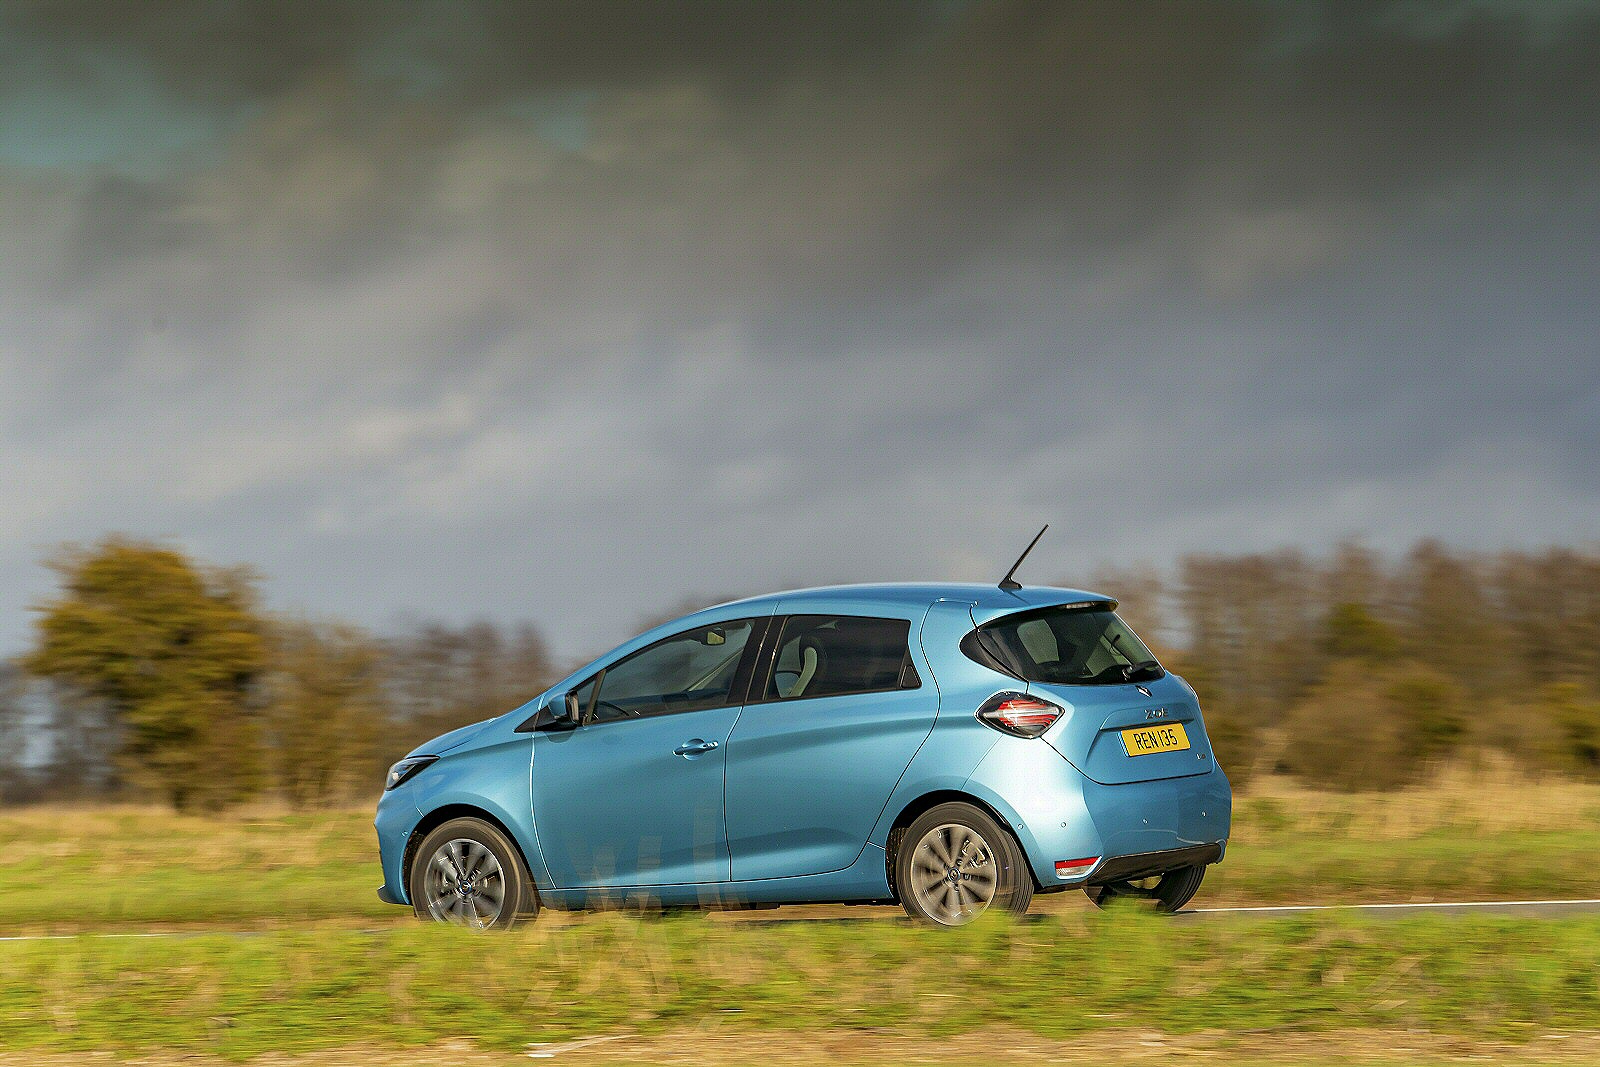 RENAULT ZOE HATCHBACK 100kW GT Line + R135 50kWh Rapid Charge 5dr Auto